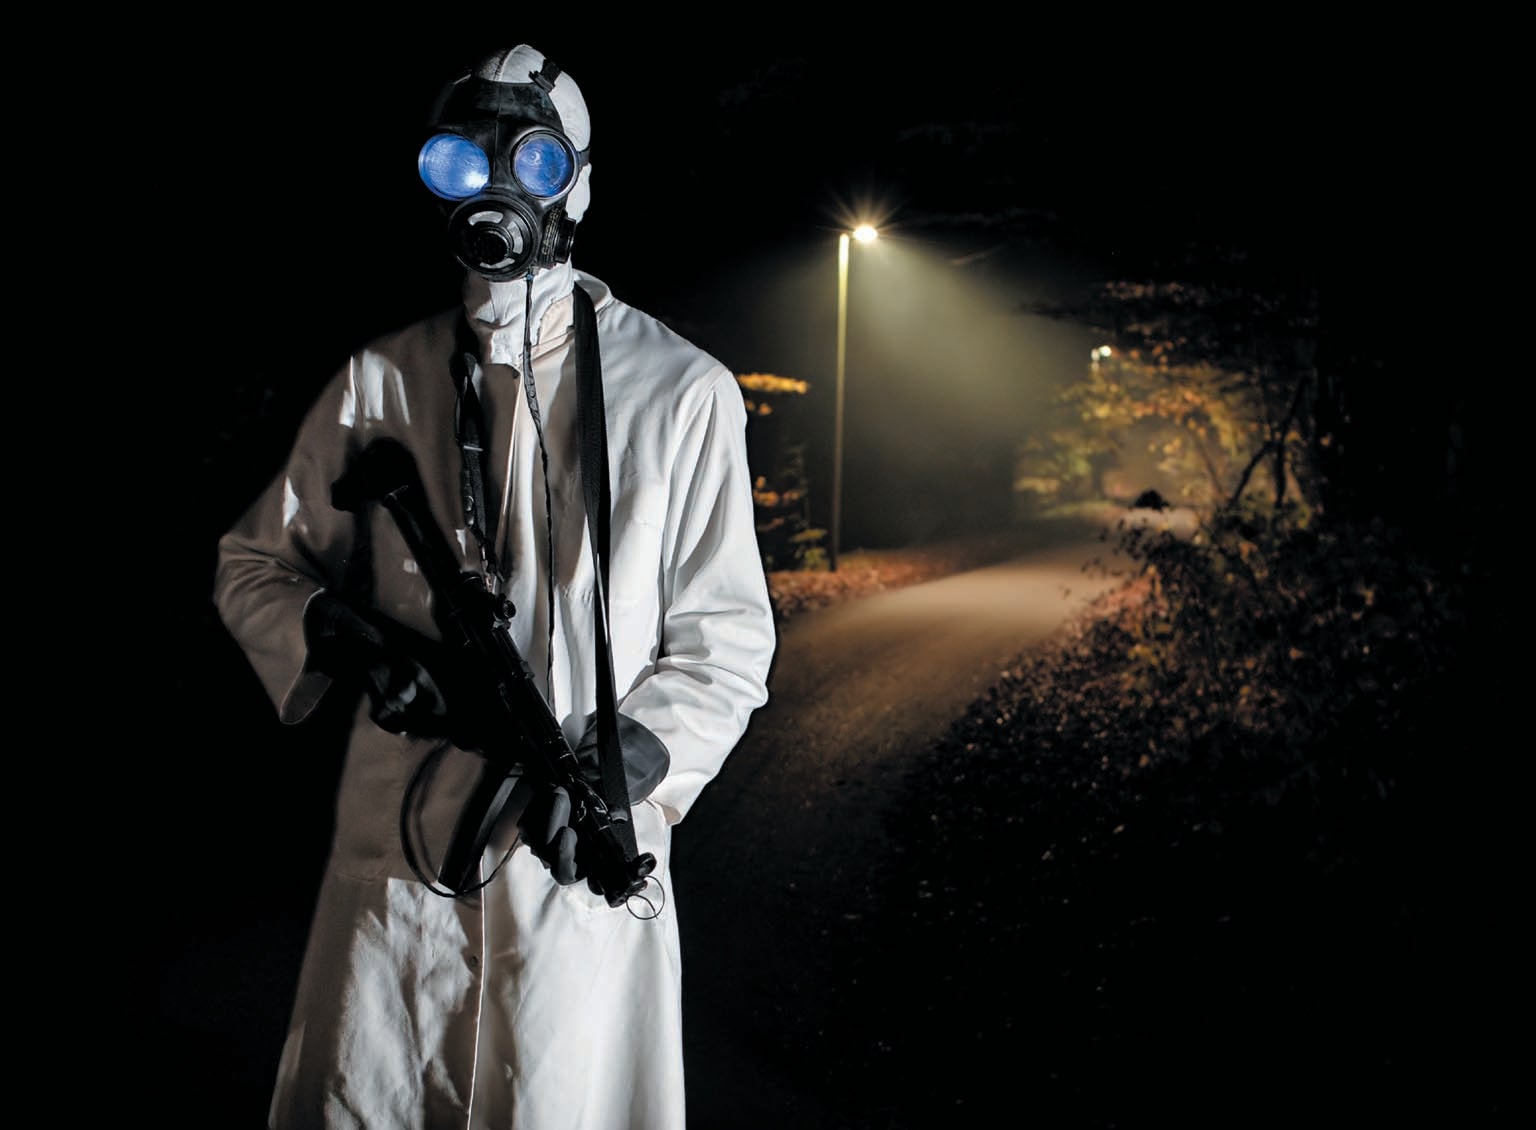 A person dressed in an intimidating outfit wearing a gas mask and holding a gun.